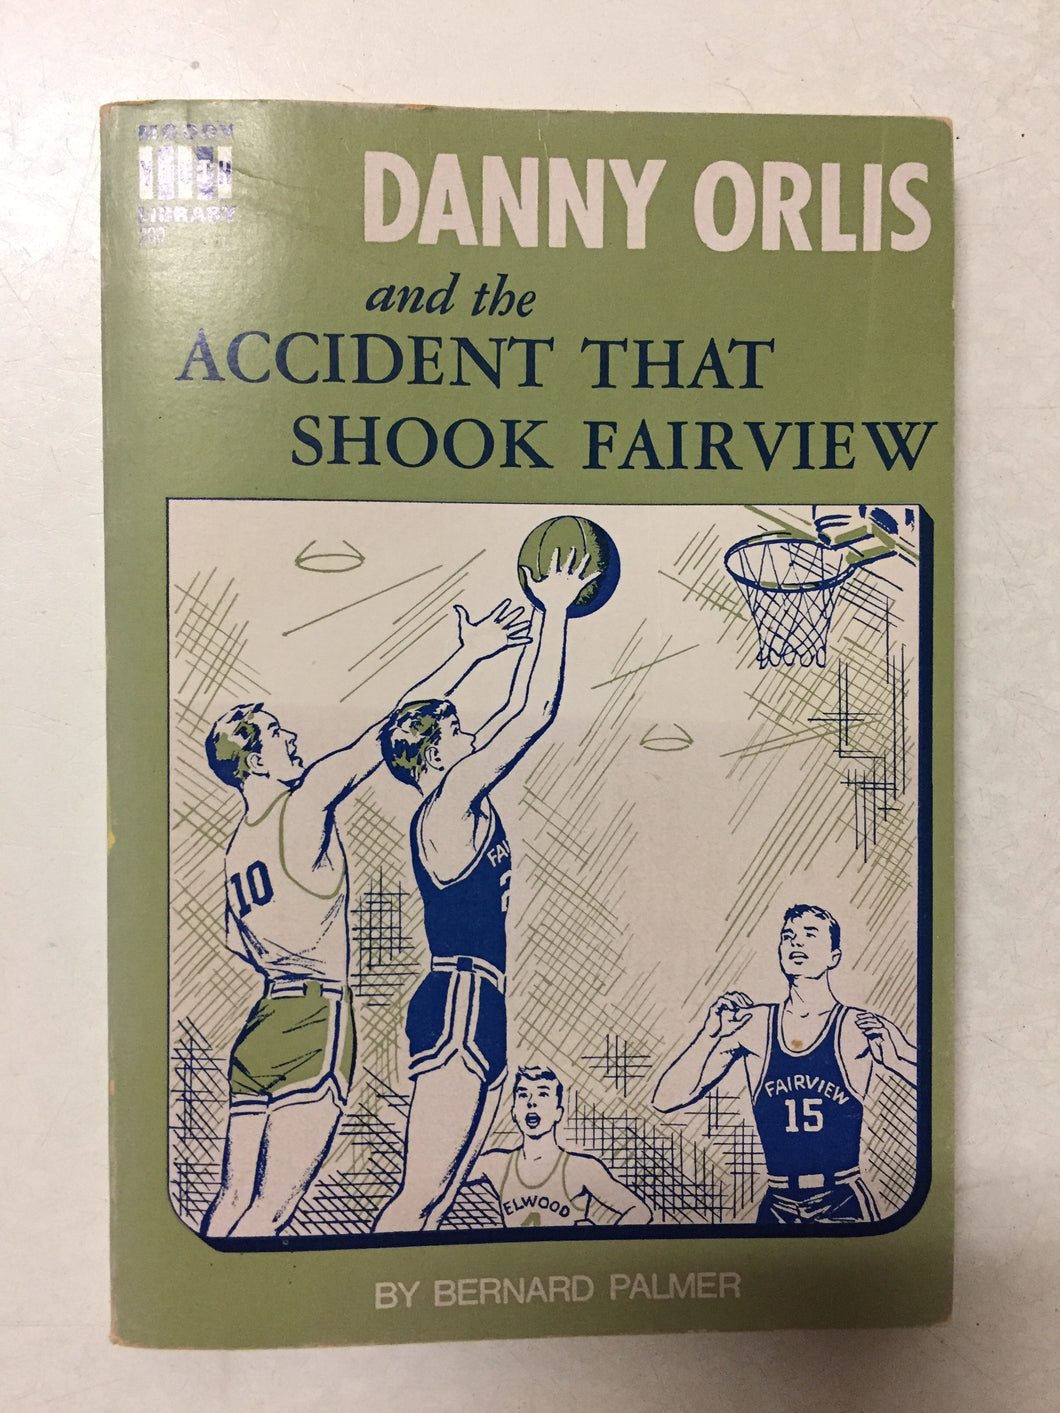 Danny Orlis and the Accident Shook Fairview - Slick Cat Books